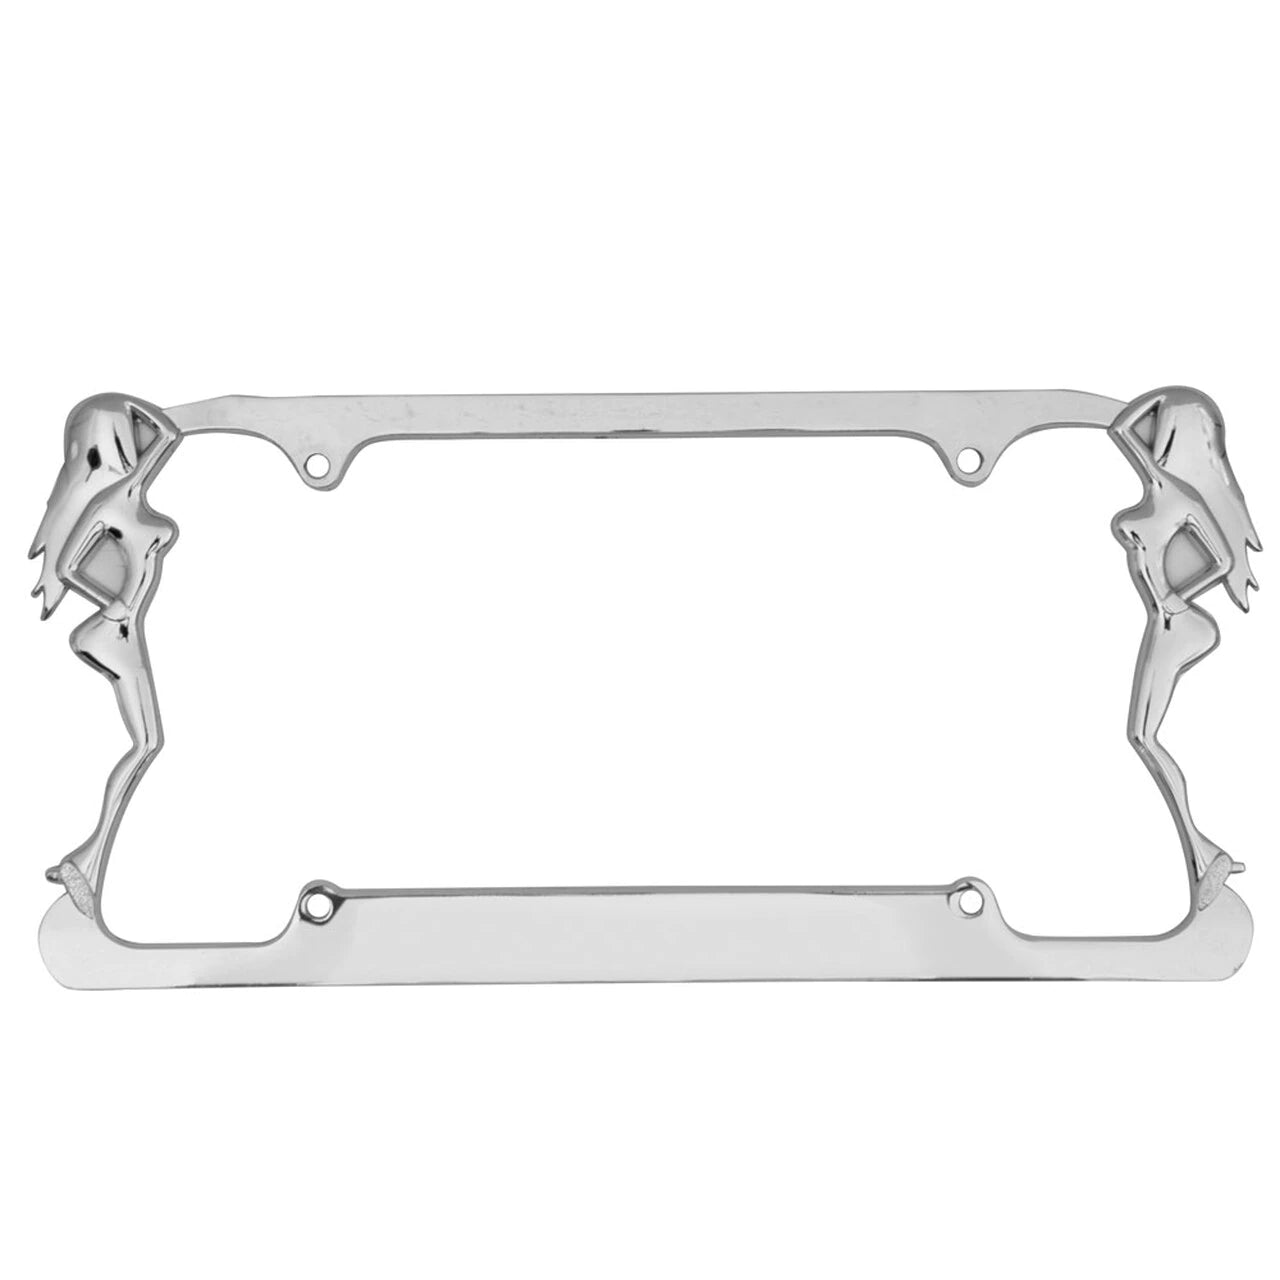 Chrome Plated Rust-Proof Die-Cast Stainless Metal License Plate Frame/Holder Universal Size - Sexy Lucky Ladies (Pack of 2) - 2-Pack